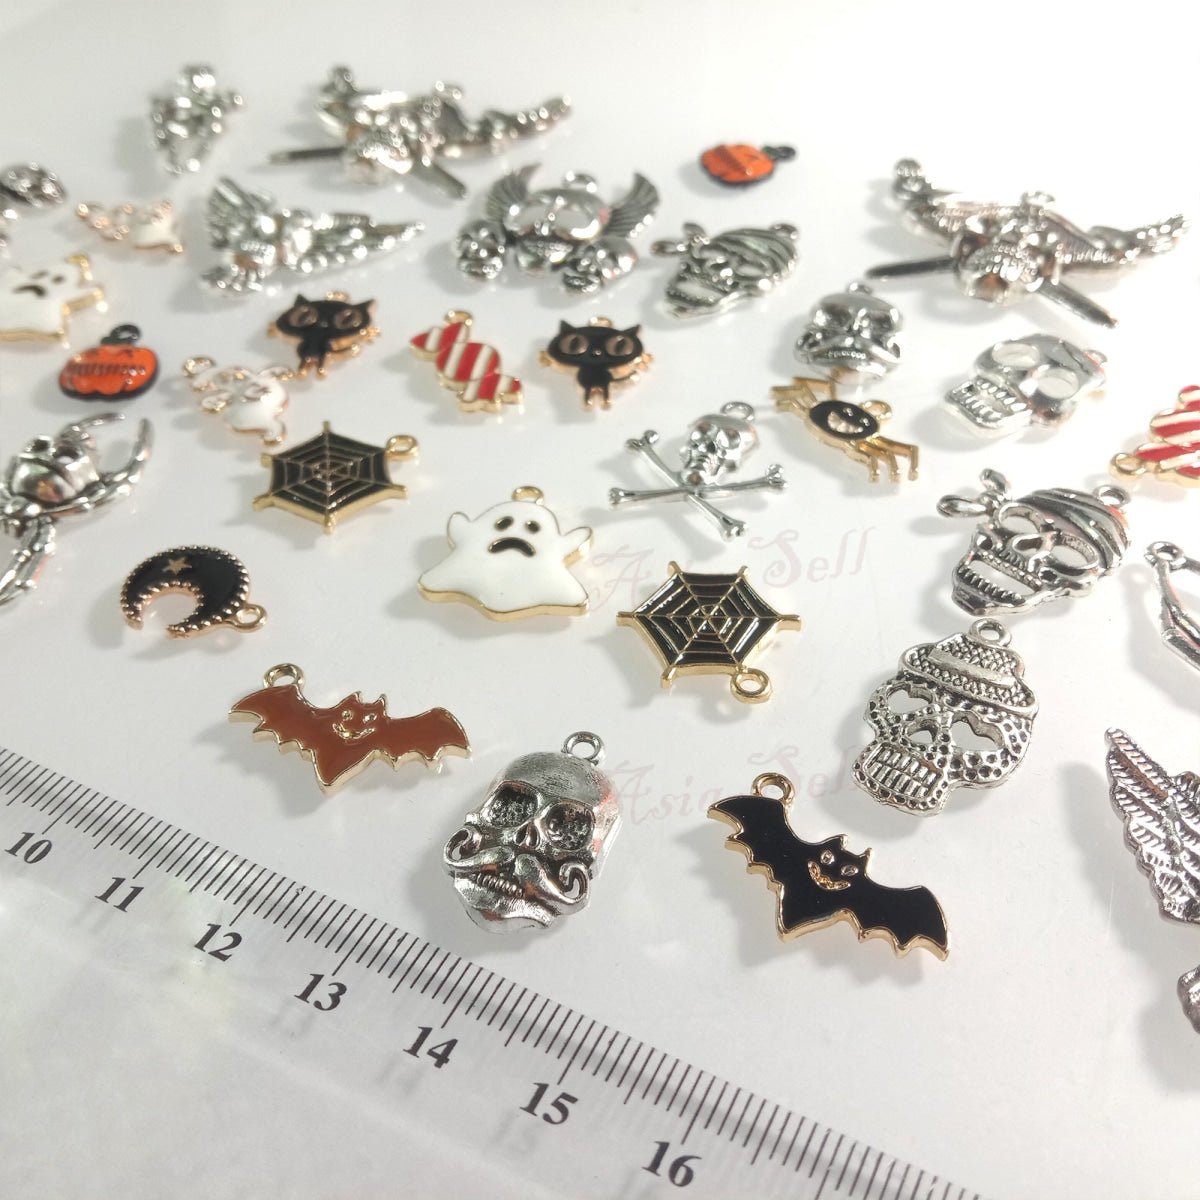 20 Pairs Halloween Charms Mixed Enamel Pendant Jewellery Making Accessories Candy Ghost Pumpkin Bat Spider Cat Skull - Asia Sell